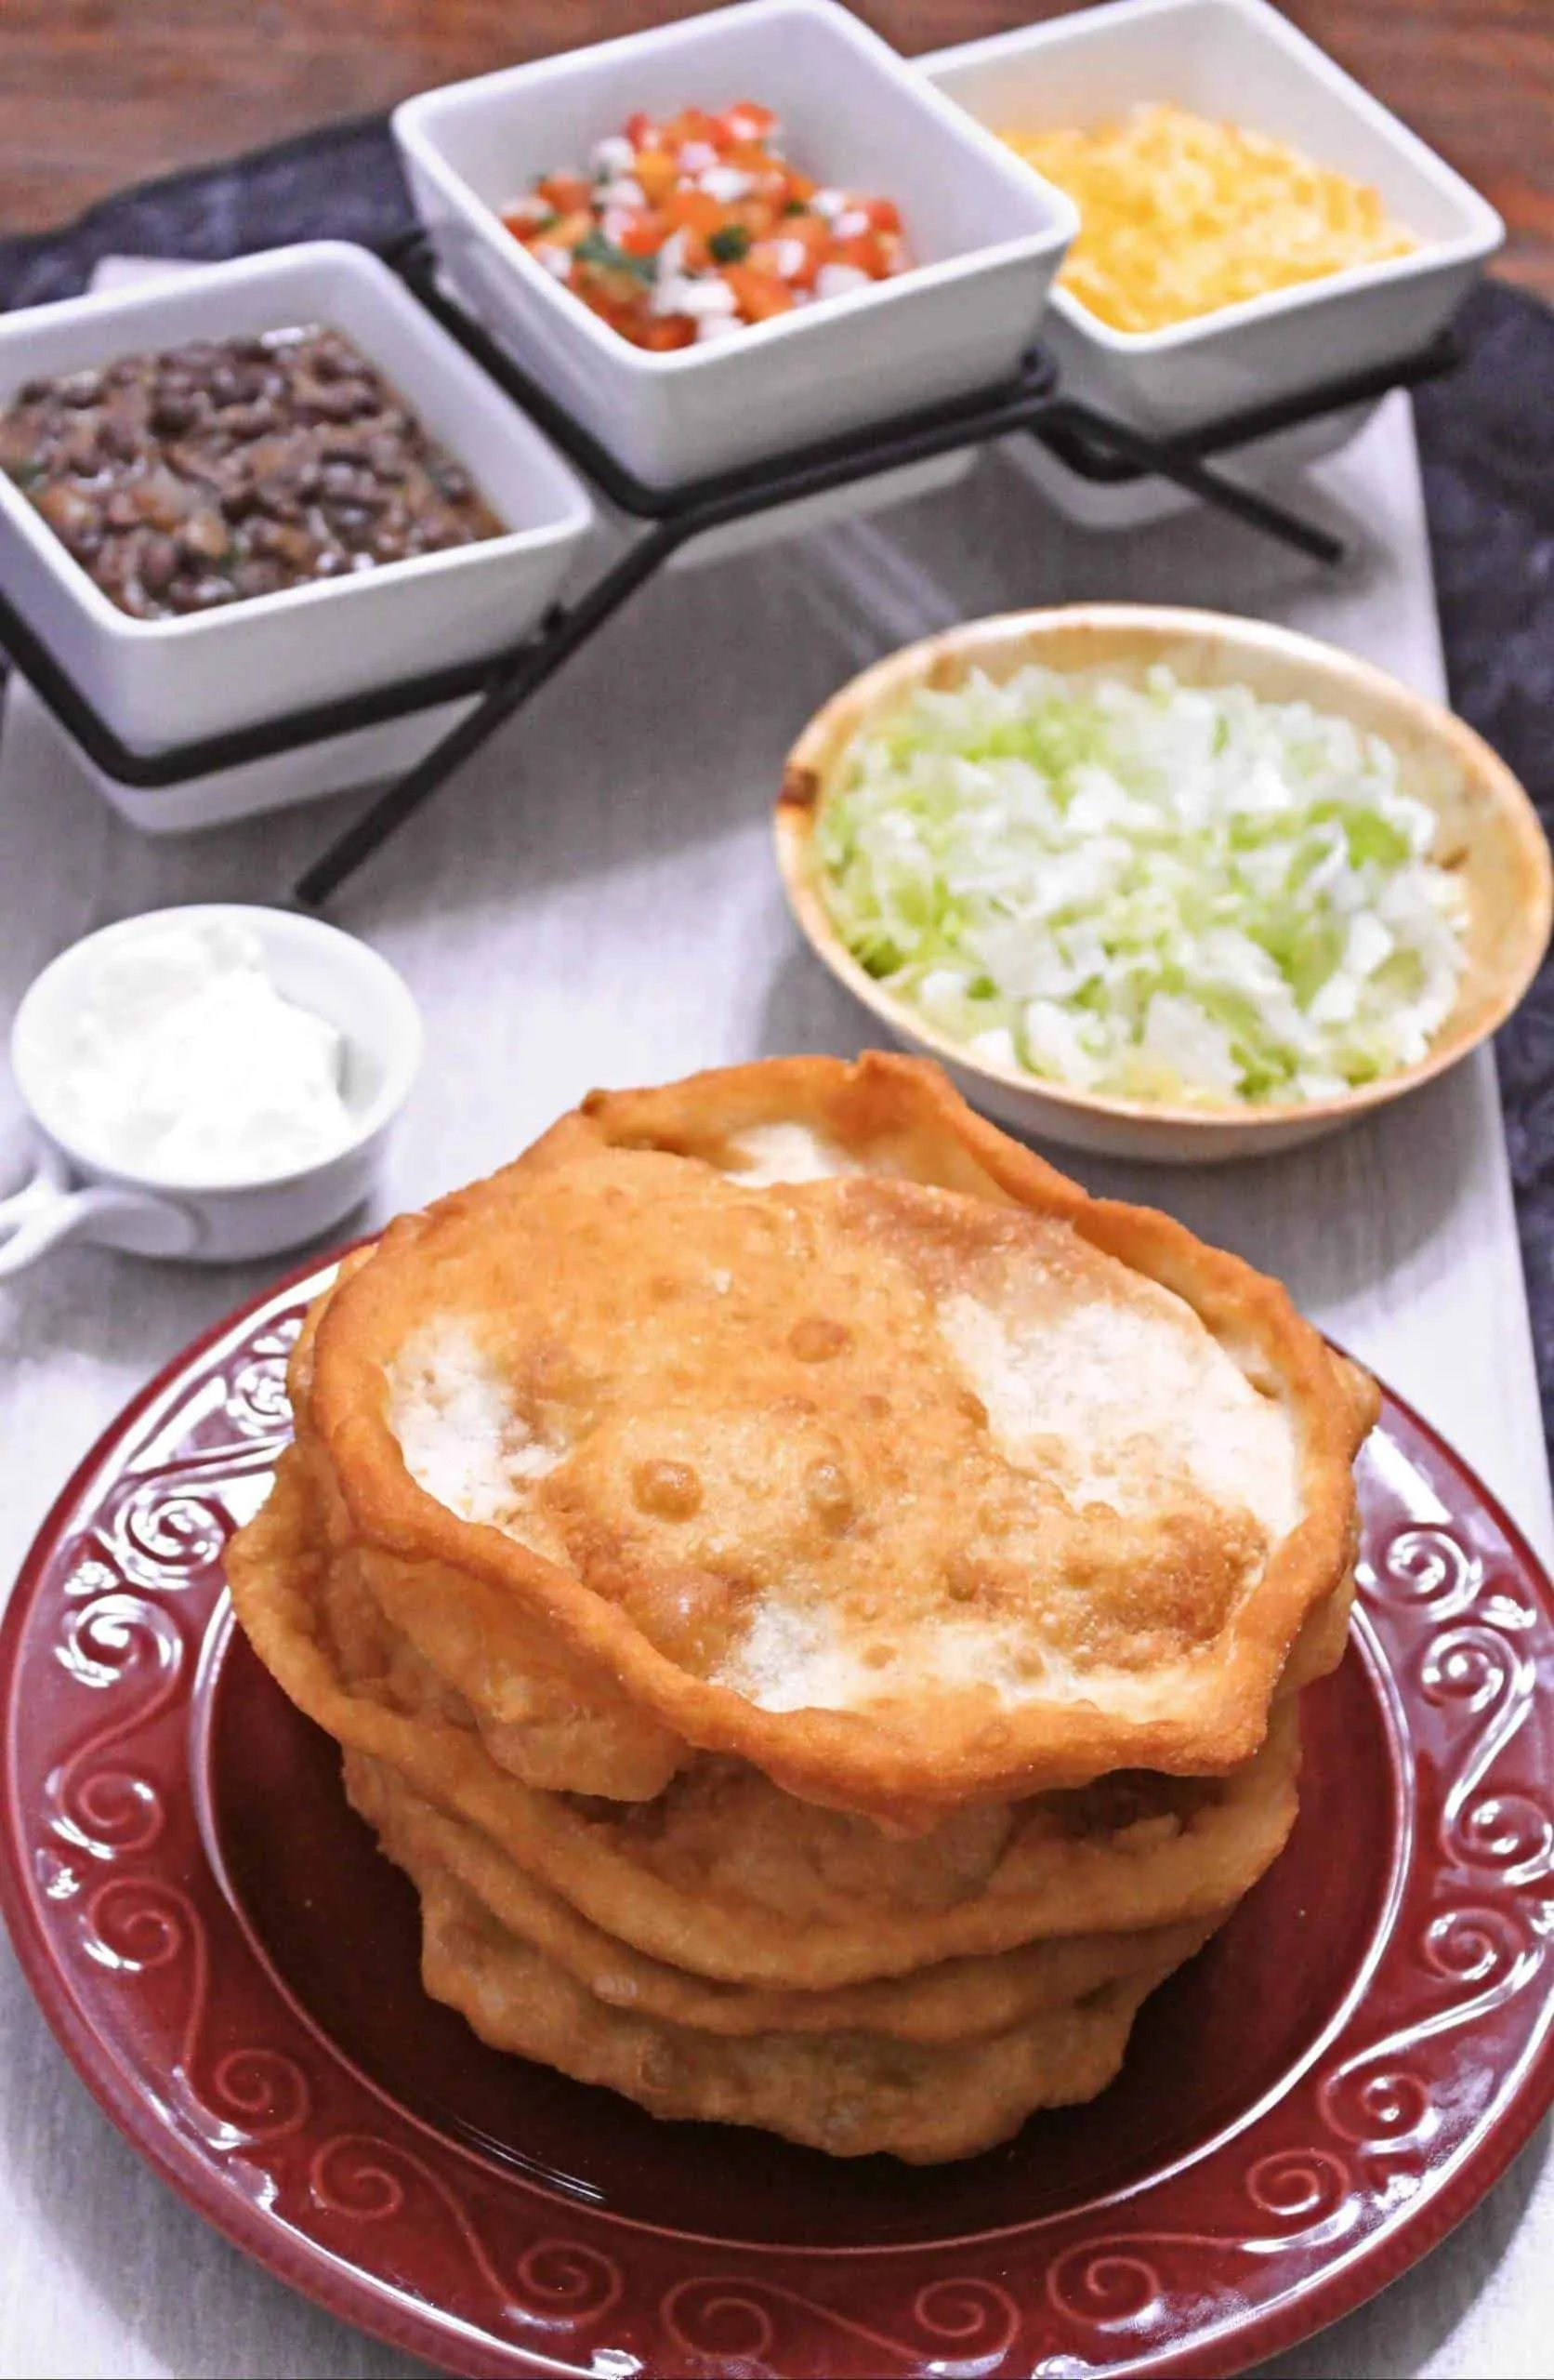 Fry bread with beans, lettuce, cheese and salsa on the side